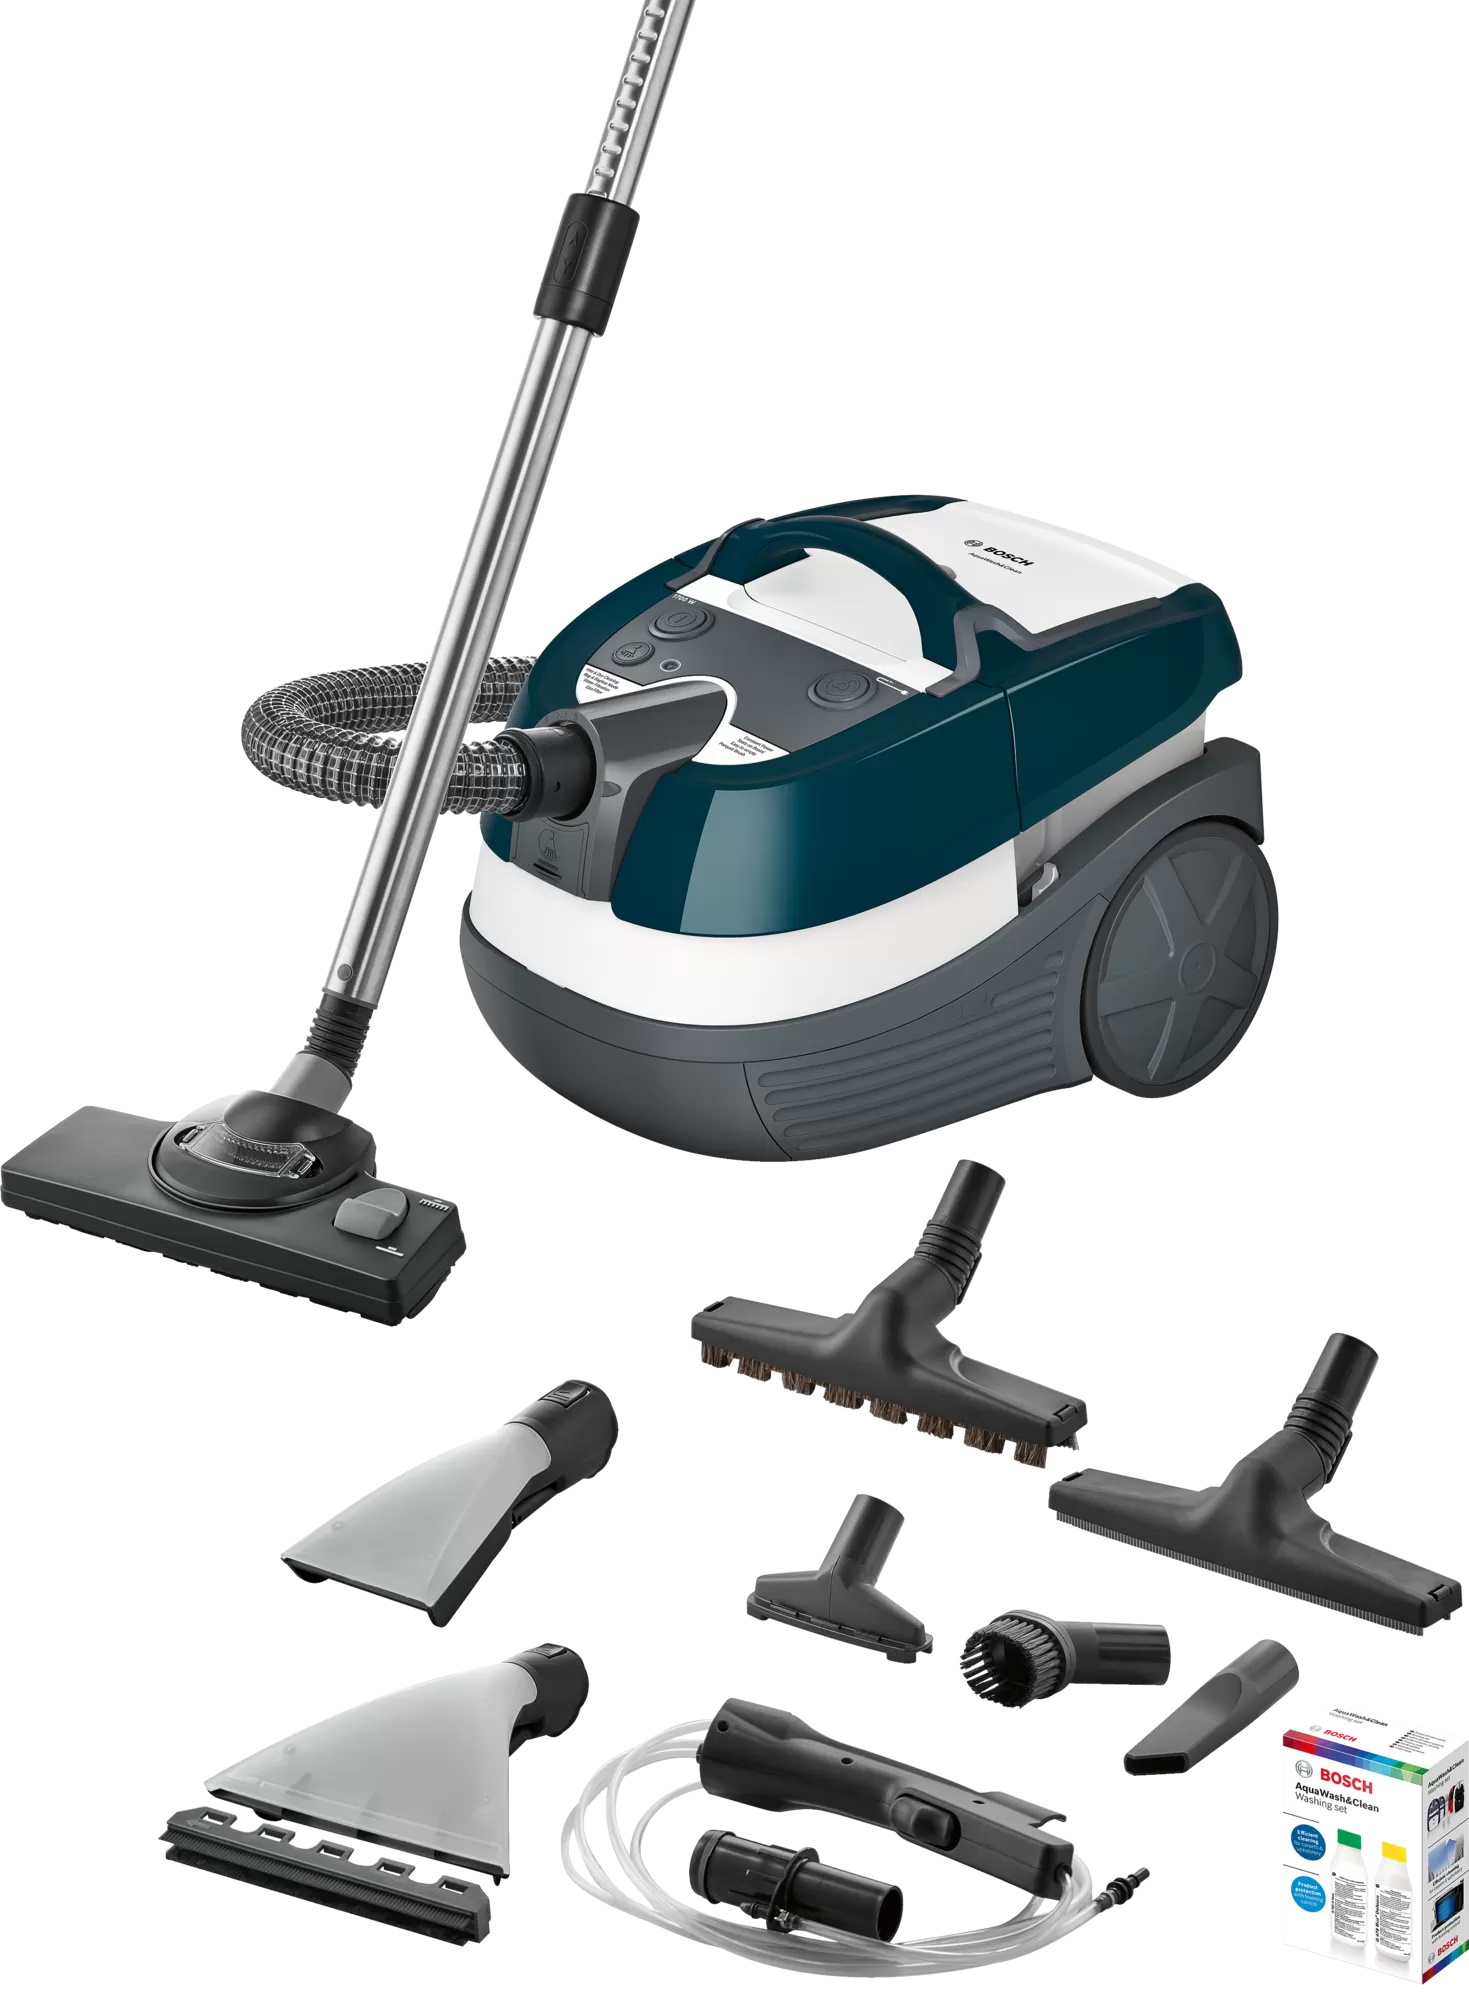 Aspirator Wet&Dry Bosch BWD41720 3in1 Serie 4 1700 W AquaWash&Clean turquoise-white-grey Bosch